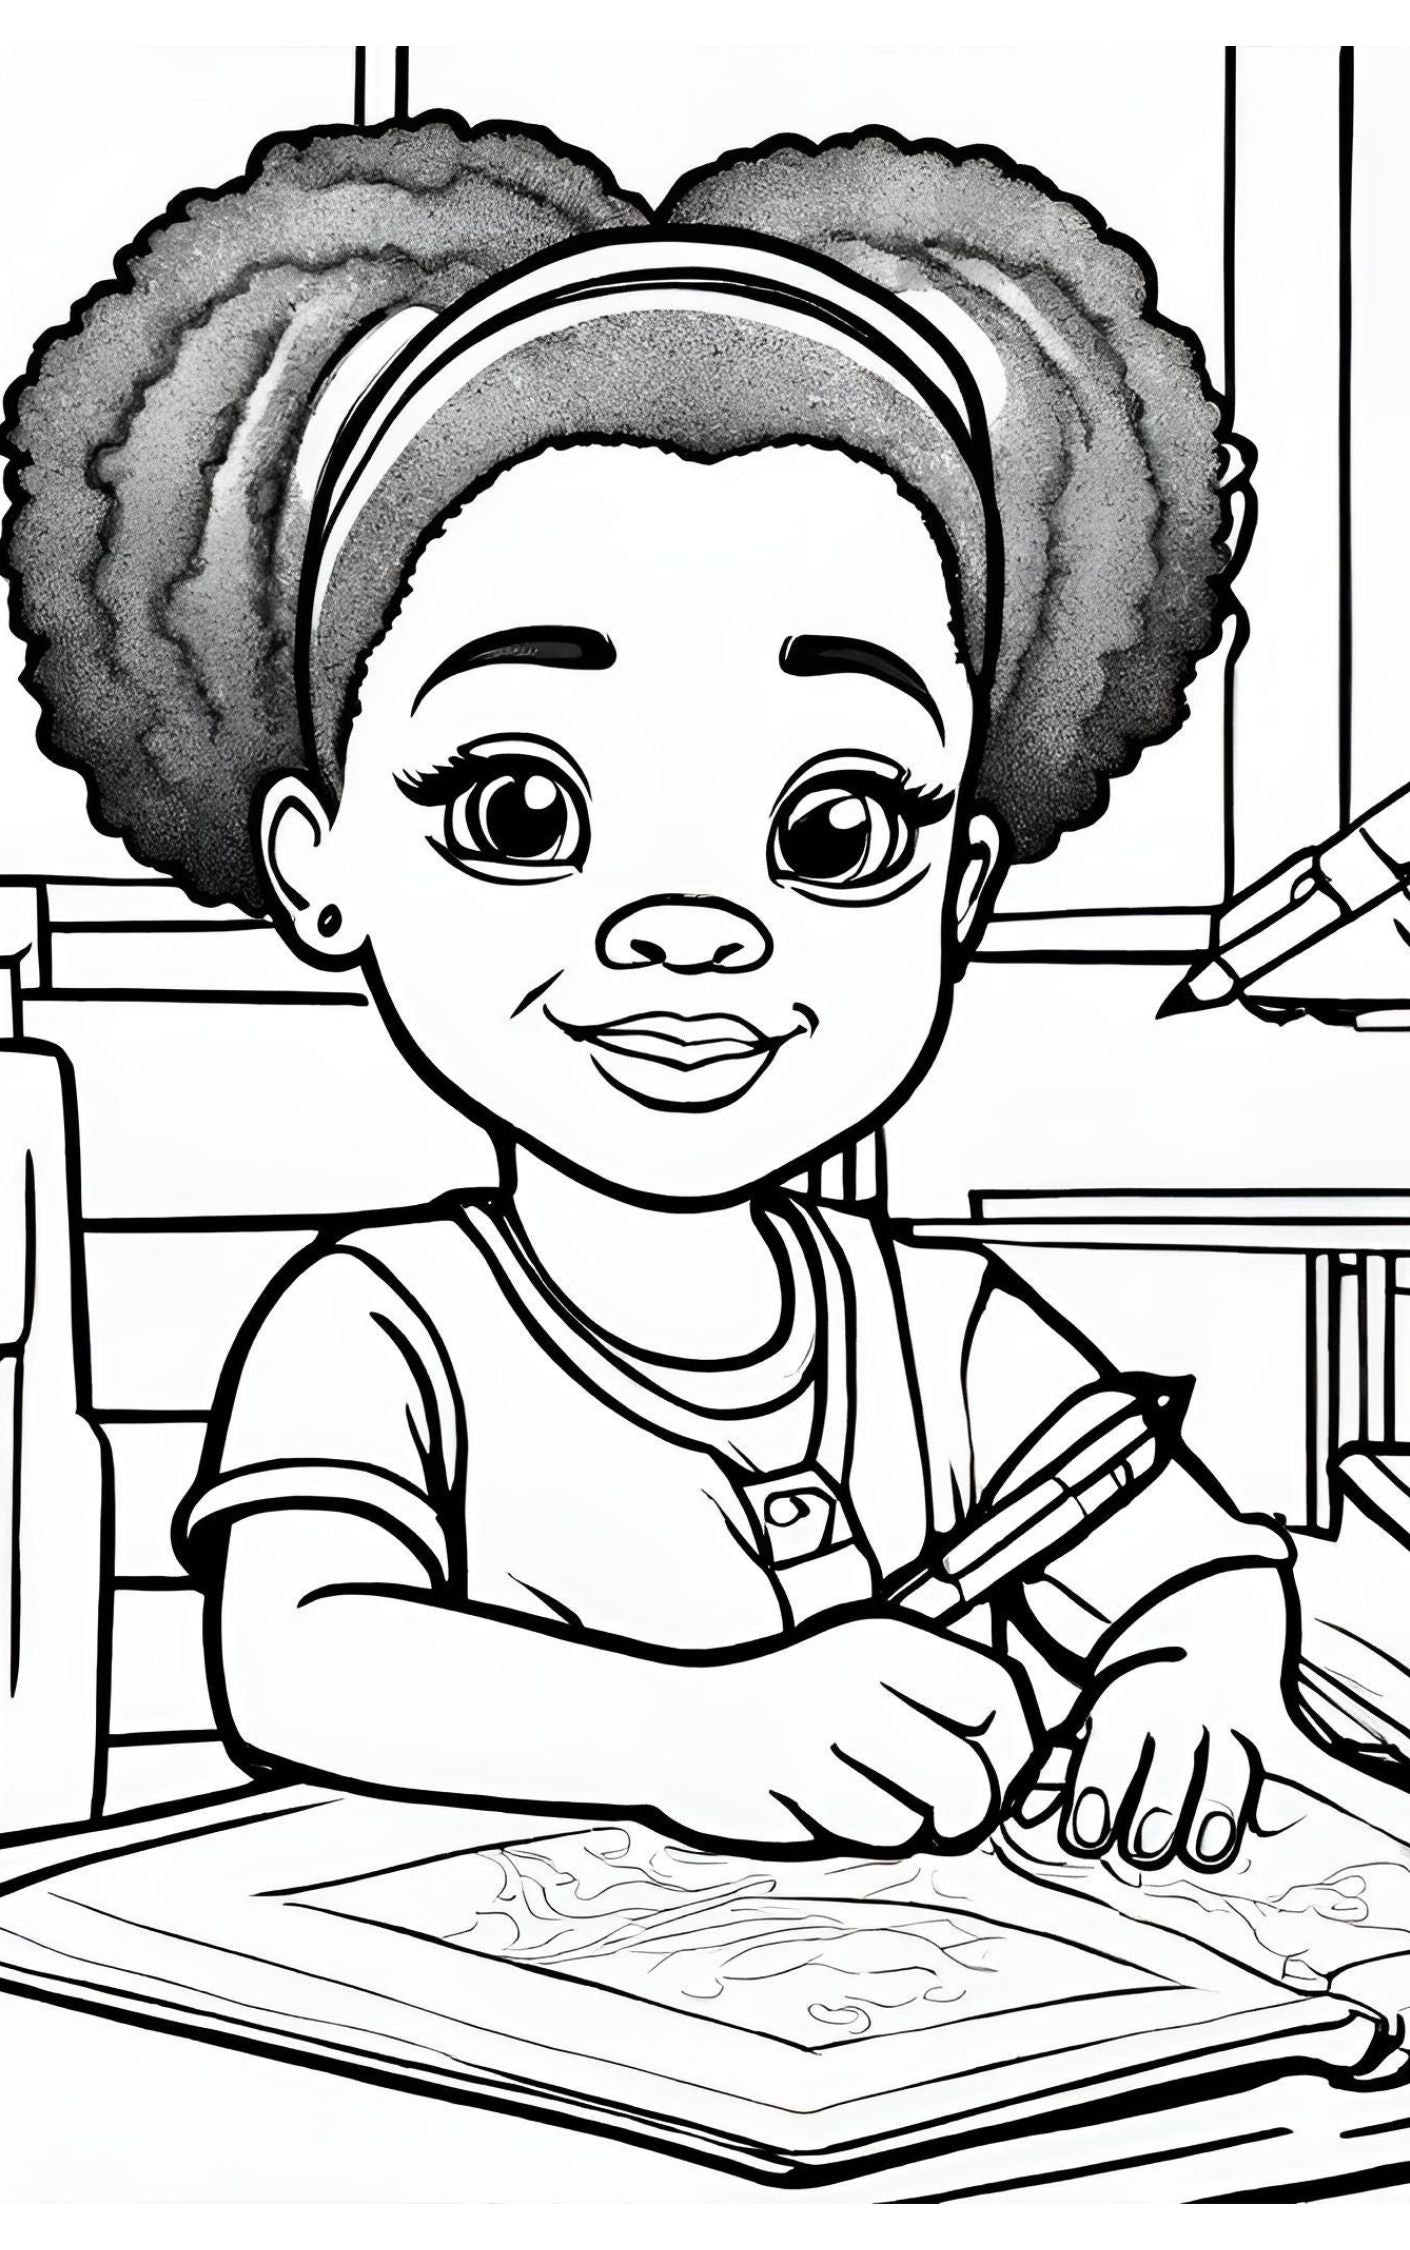 A Coloring Book that Looks like Me! - Paper Back and Hardcopy©️